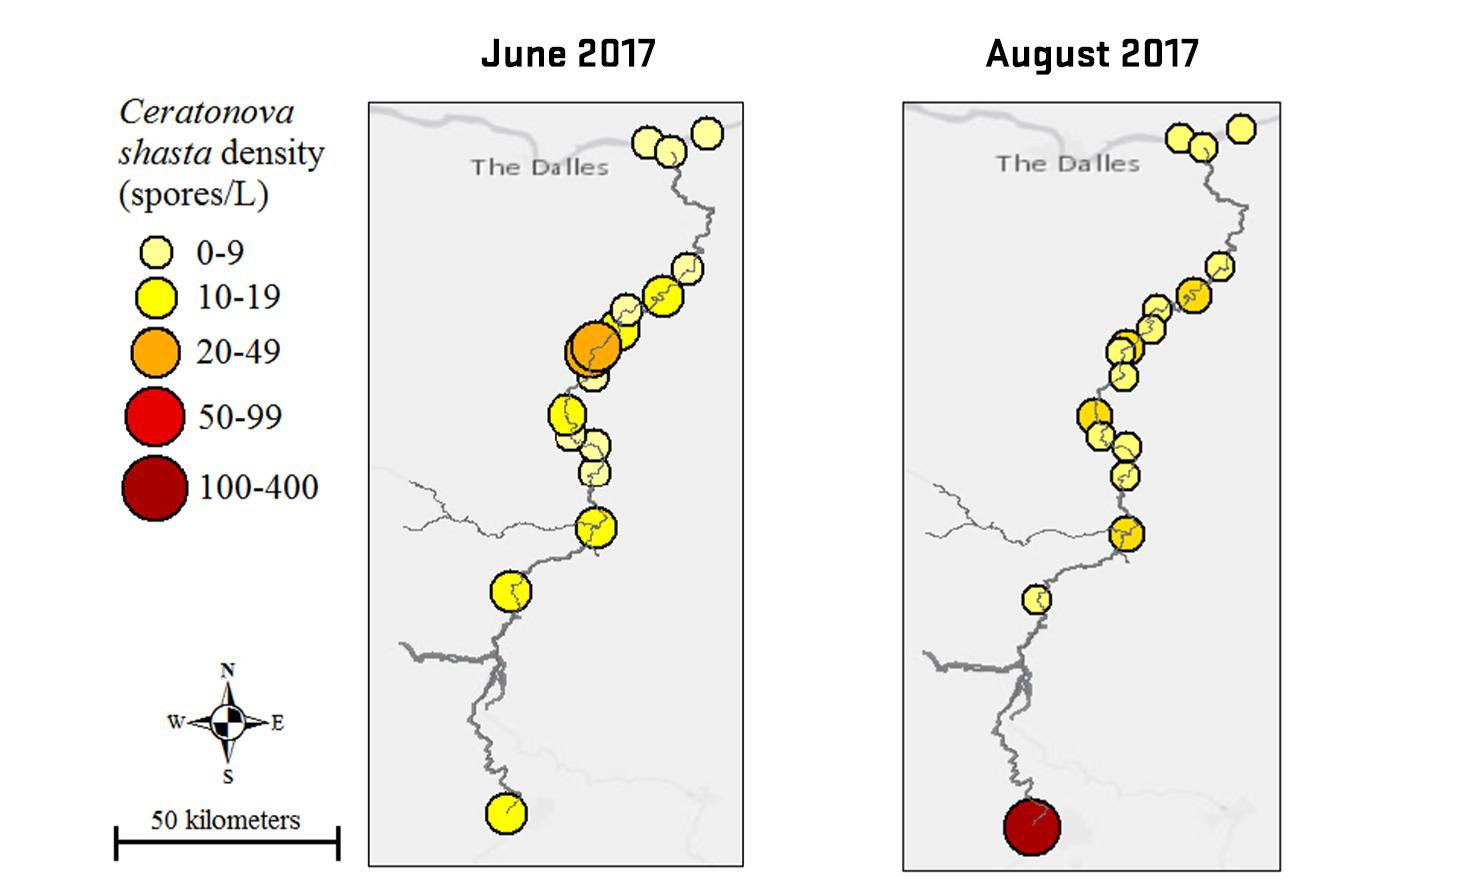 Two side-by-side maps of the Deschutes River labeled with Ceratonova shasta density (spores/L) by sample sites in red, blue, purple and yellow pie charts indicating range of density. Comparing June and August of 2017.